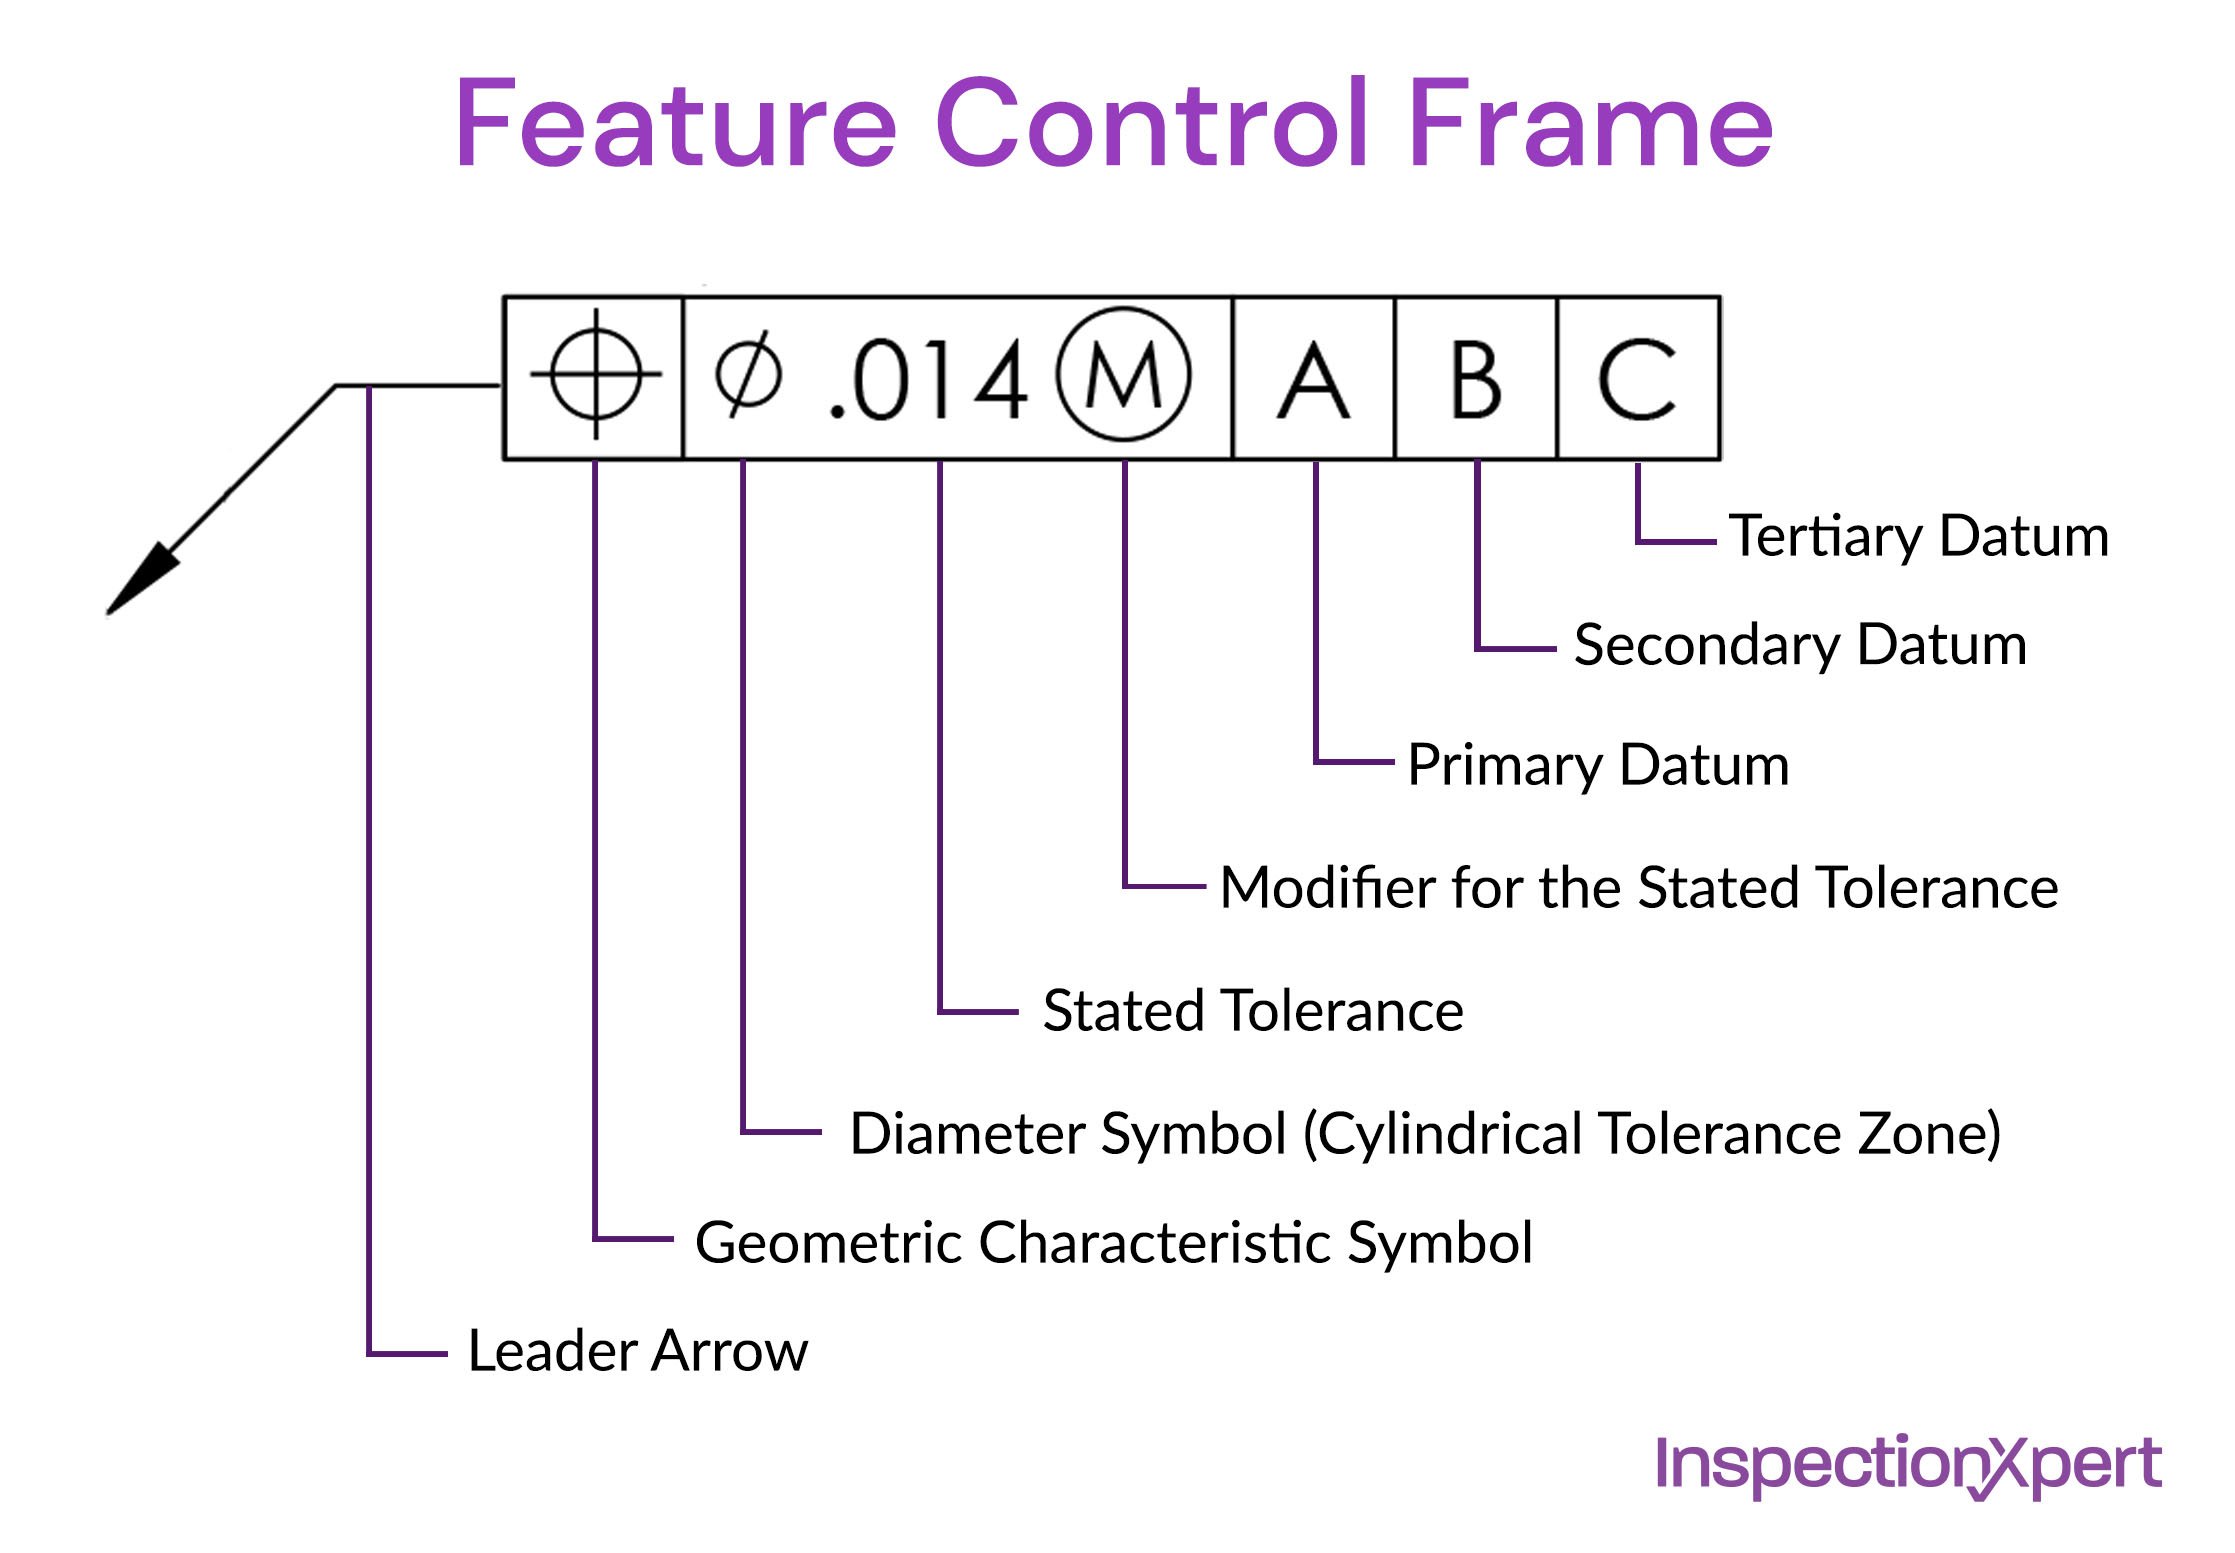 How to Read a Feature Control Frame